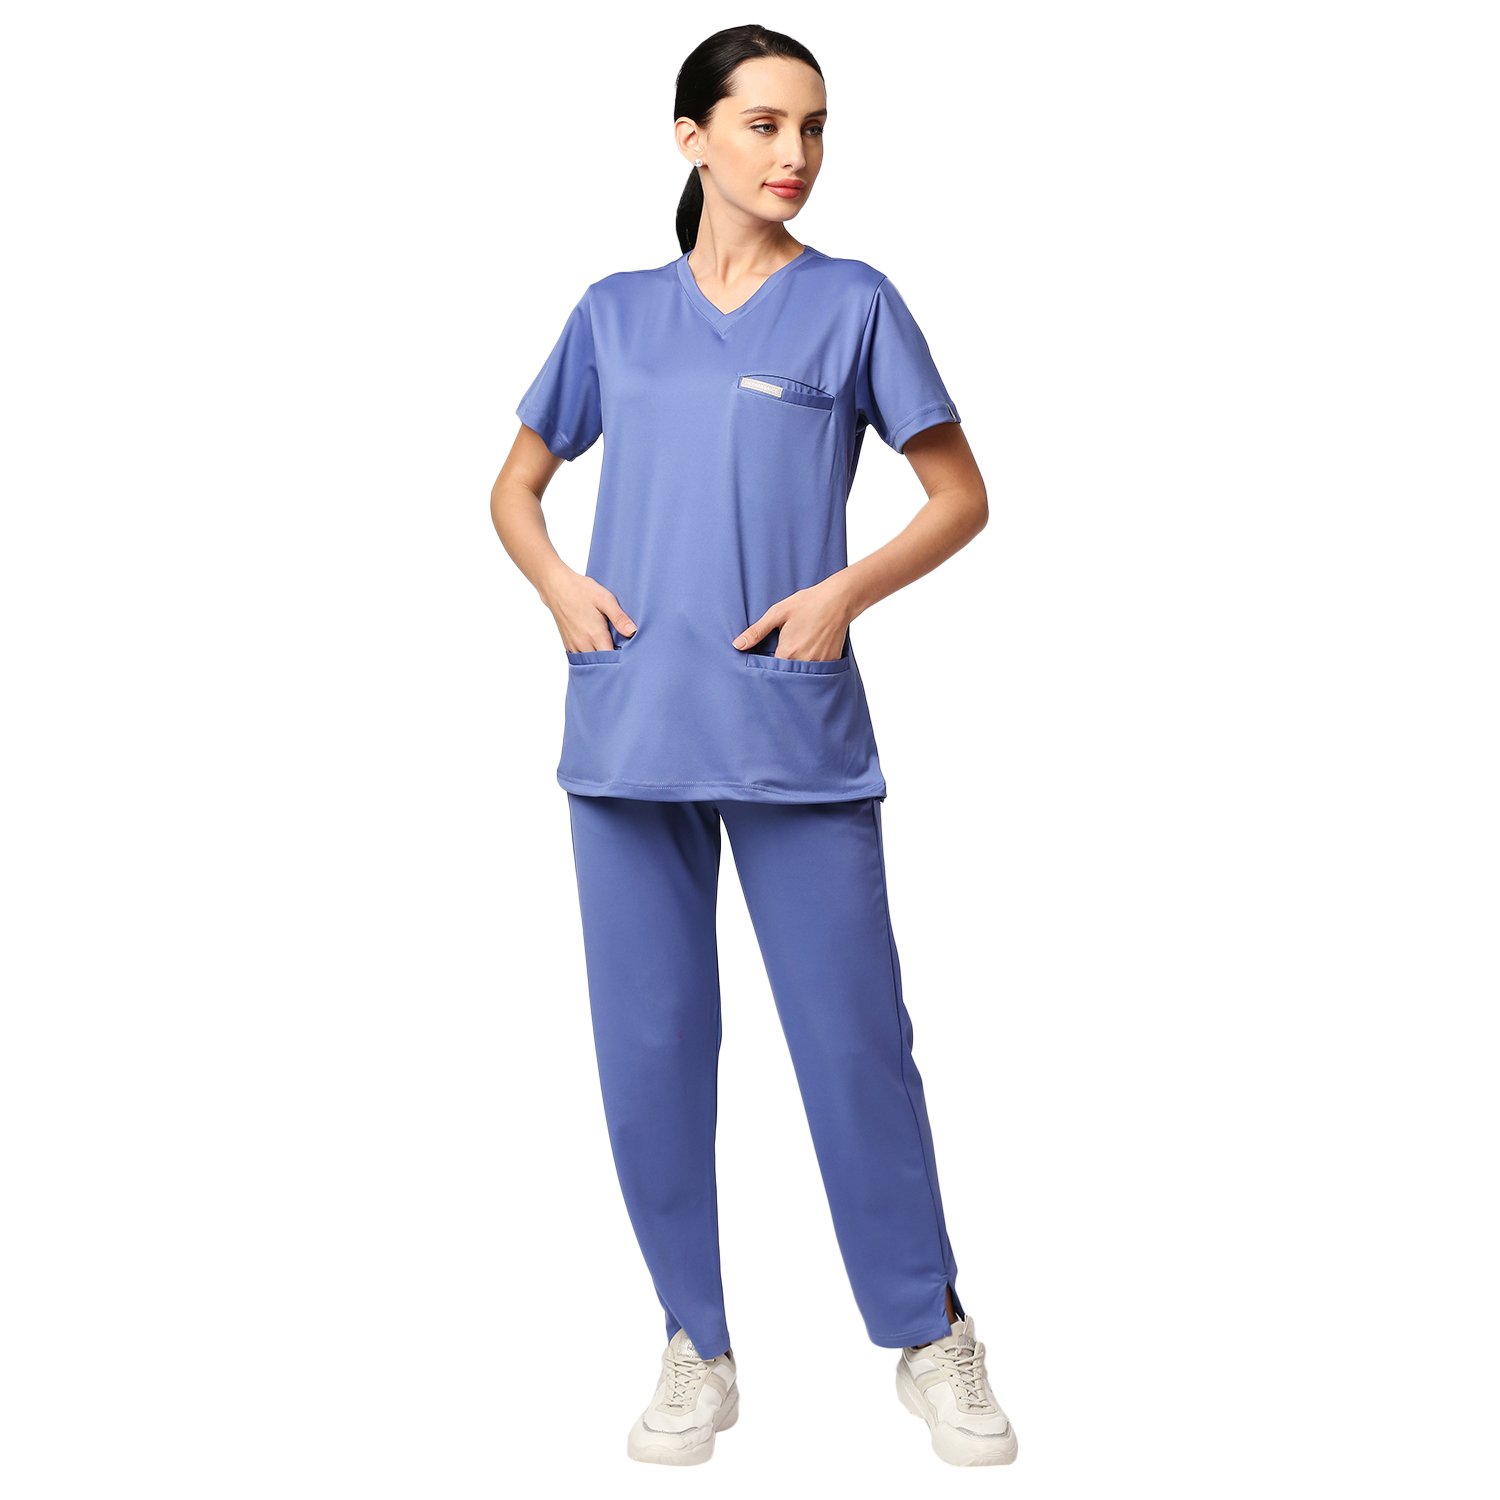 Buy Doctor Scrubs - Thermaissance